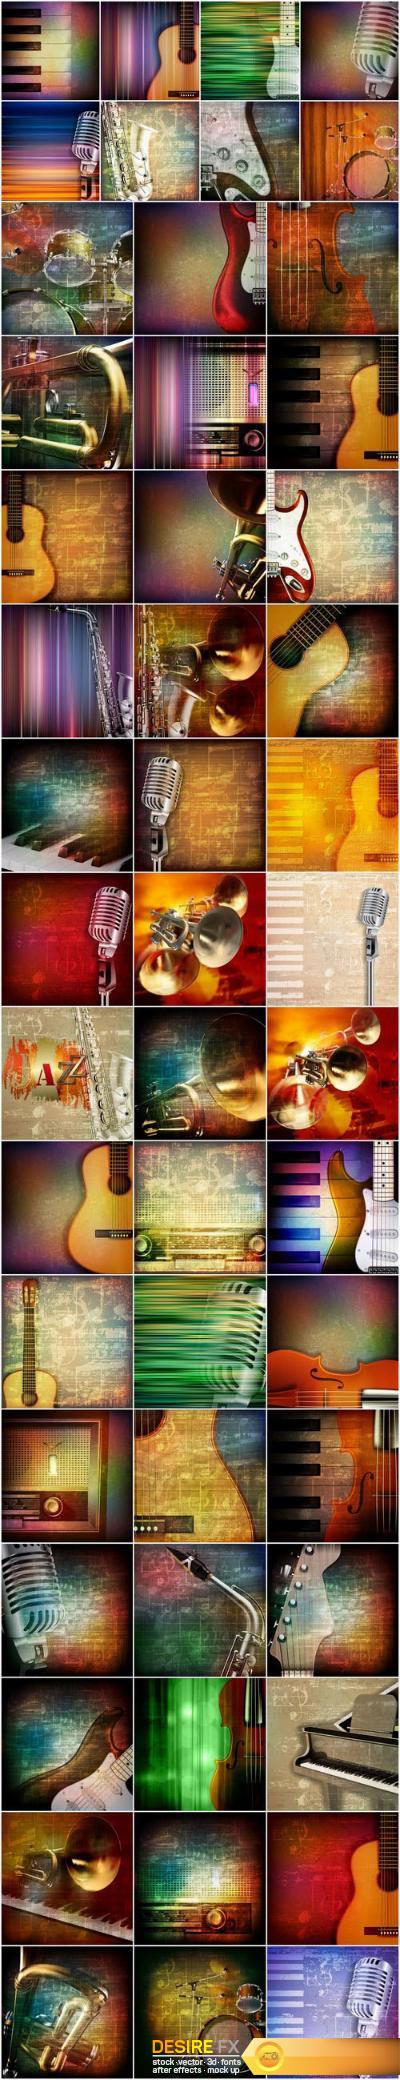 Musical instrument on abstract and grunge backgrounds - 50xEPS